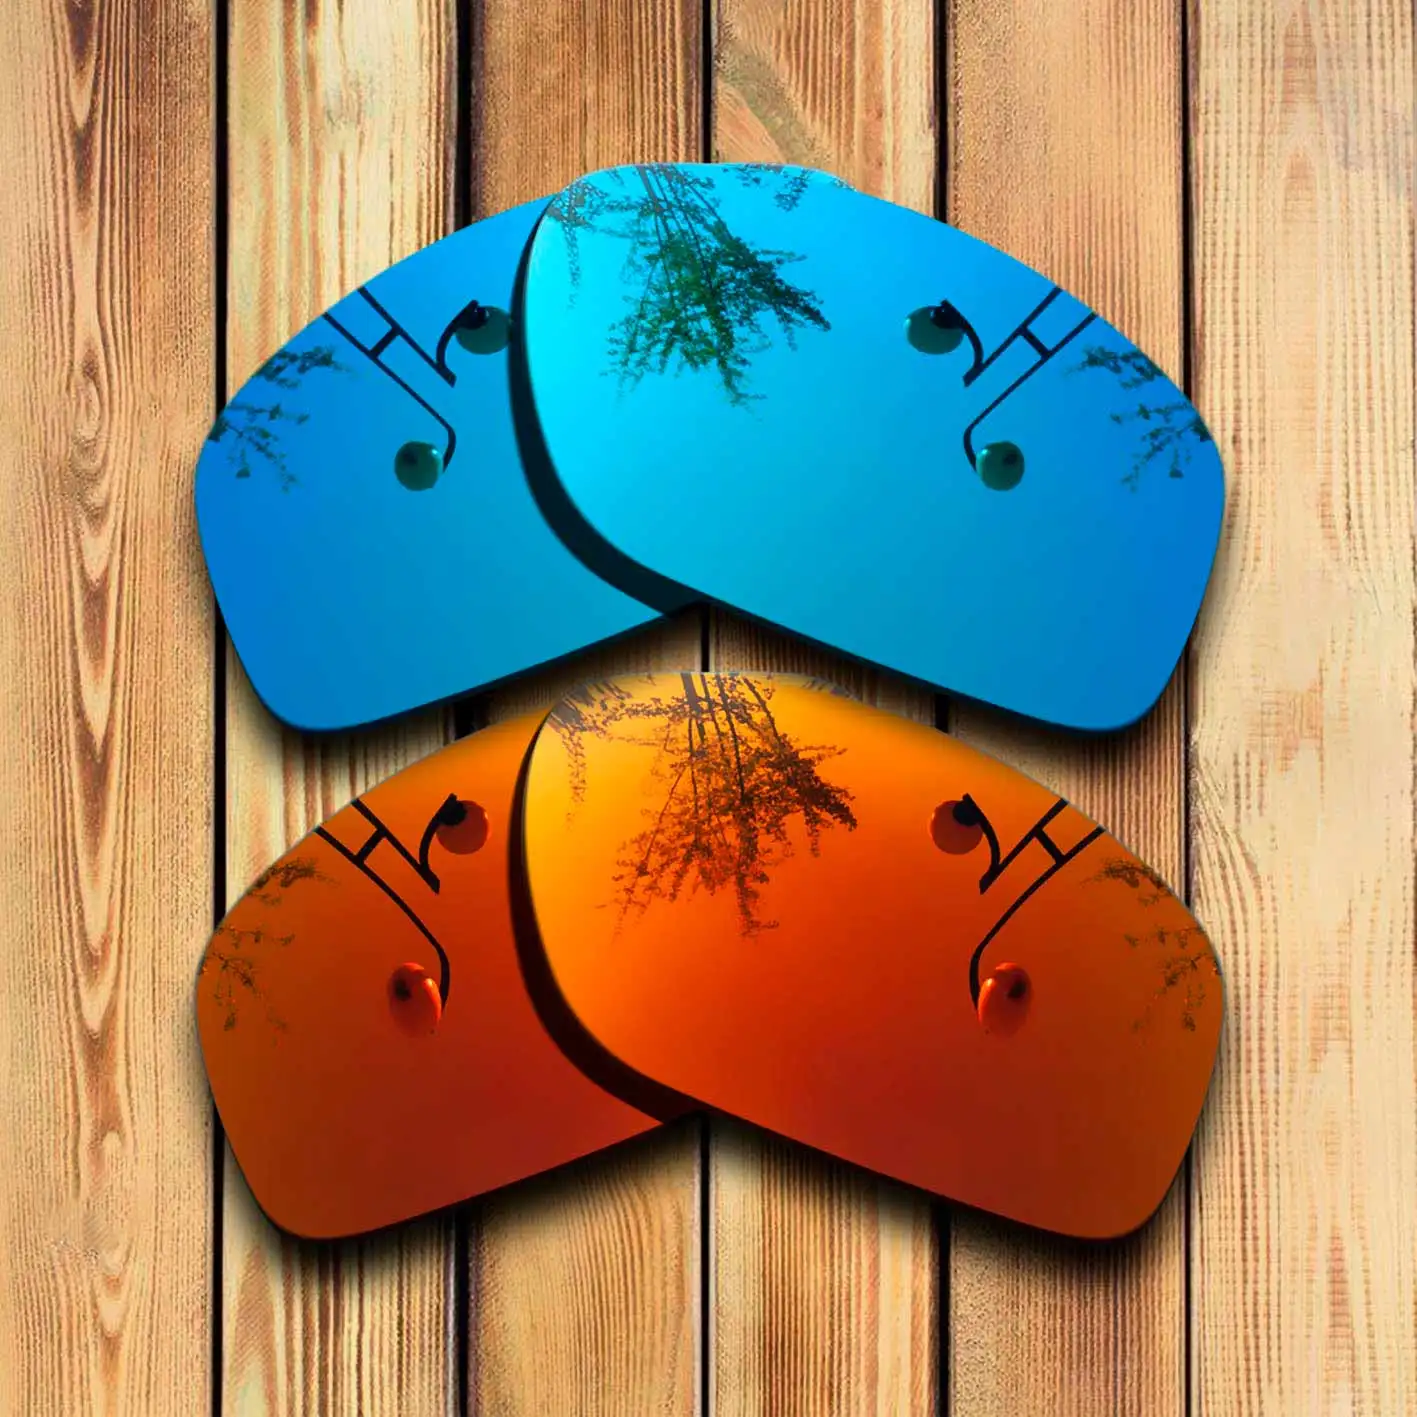 100% Precisely Cut Polarized Replacement Lenses for Tincan Sunglasses  Blue& Red Combine Options